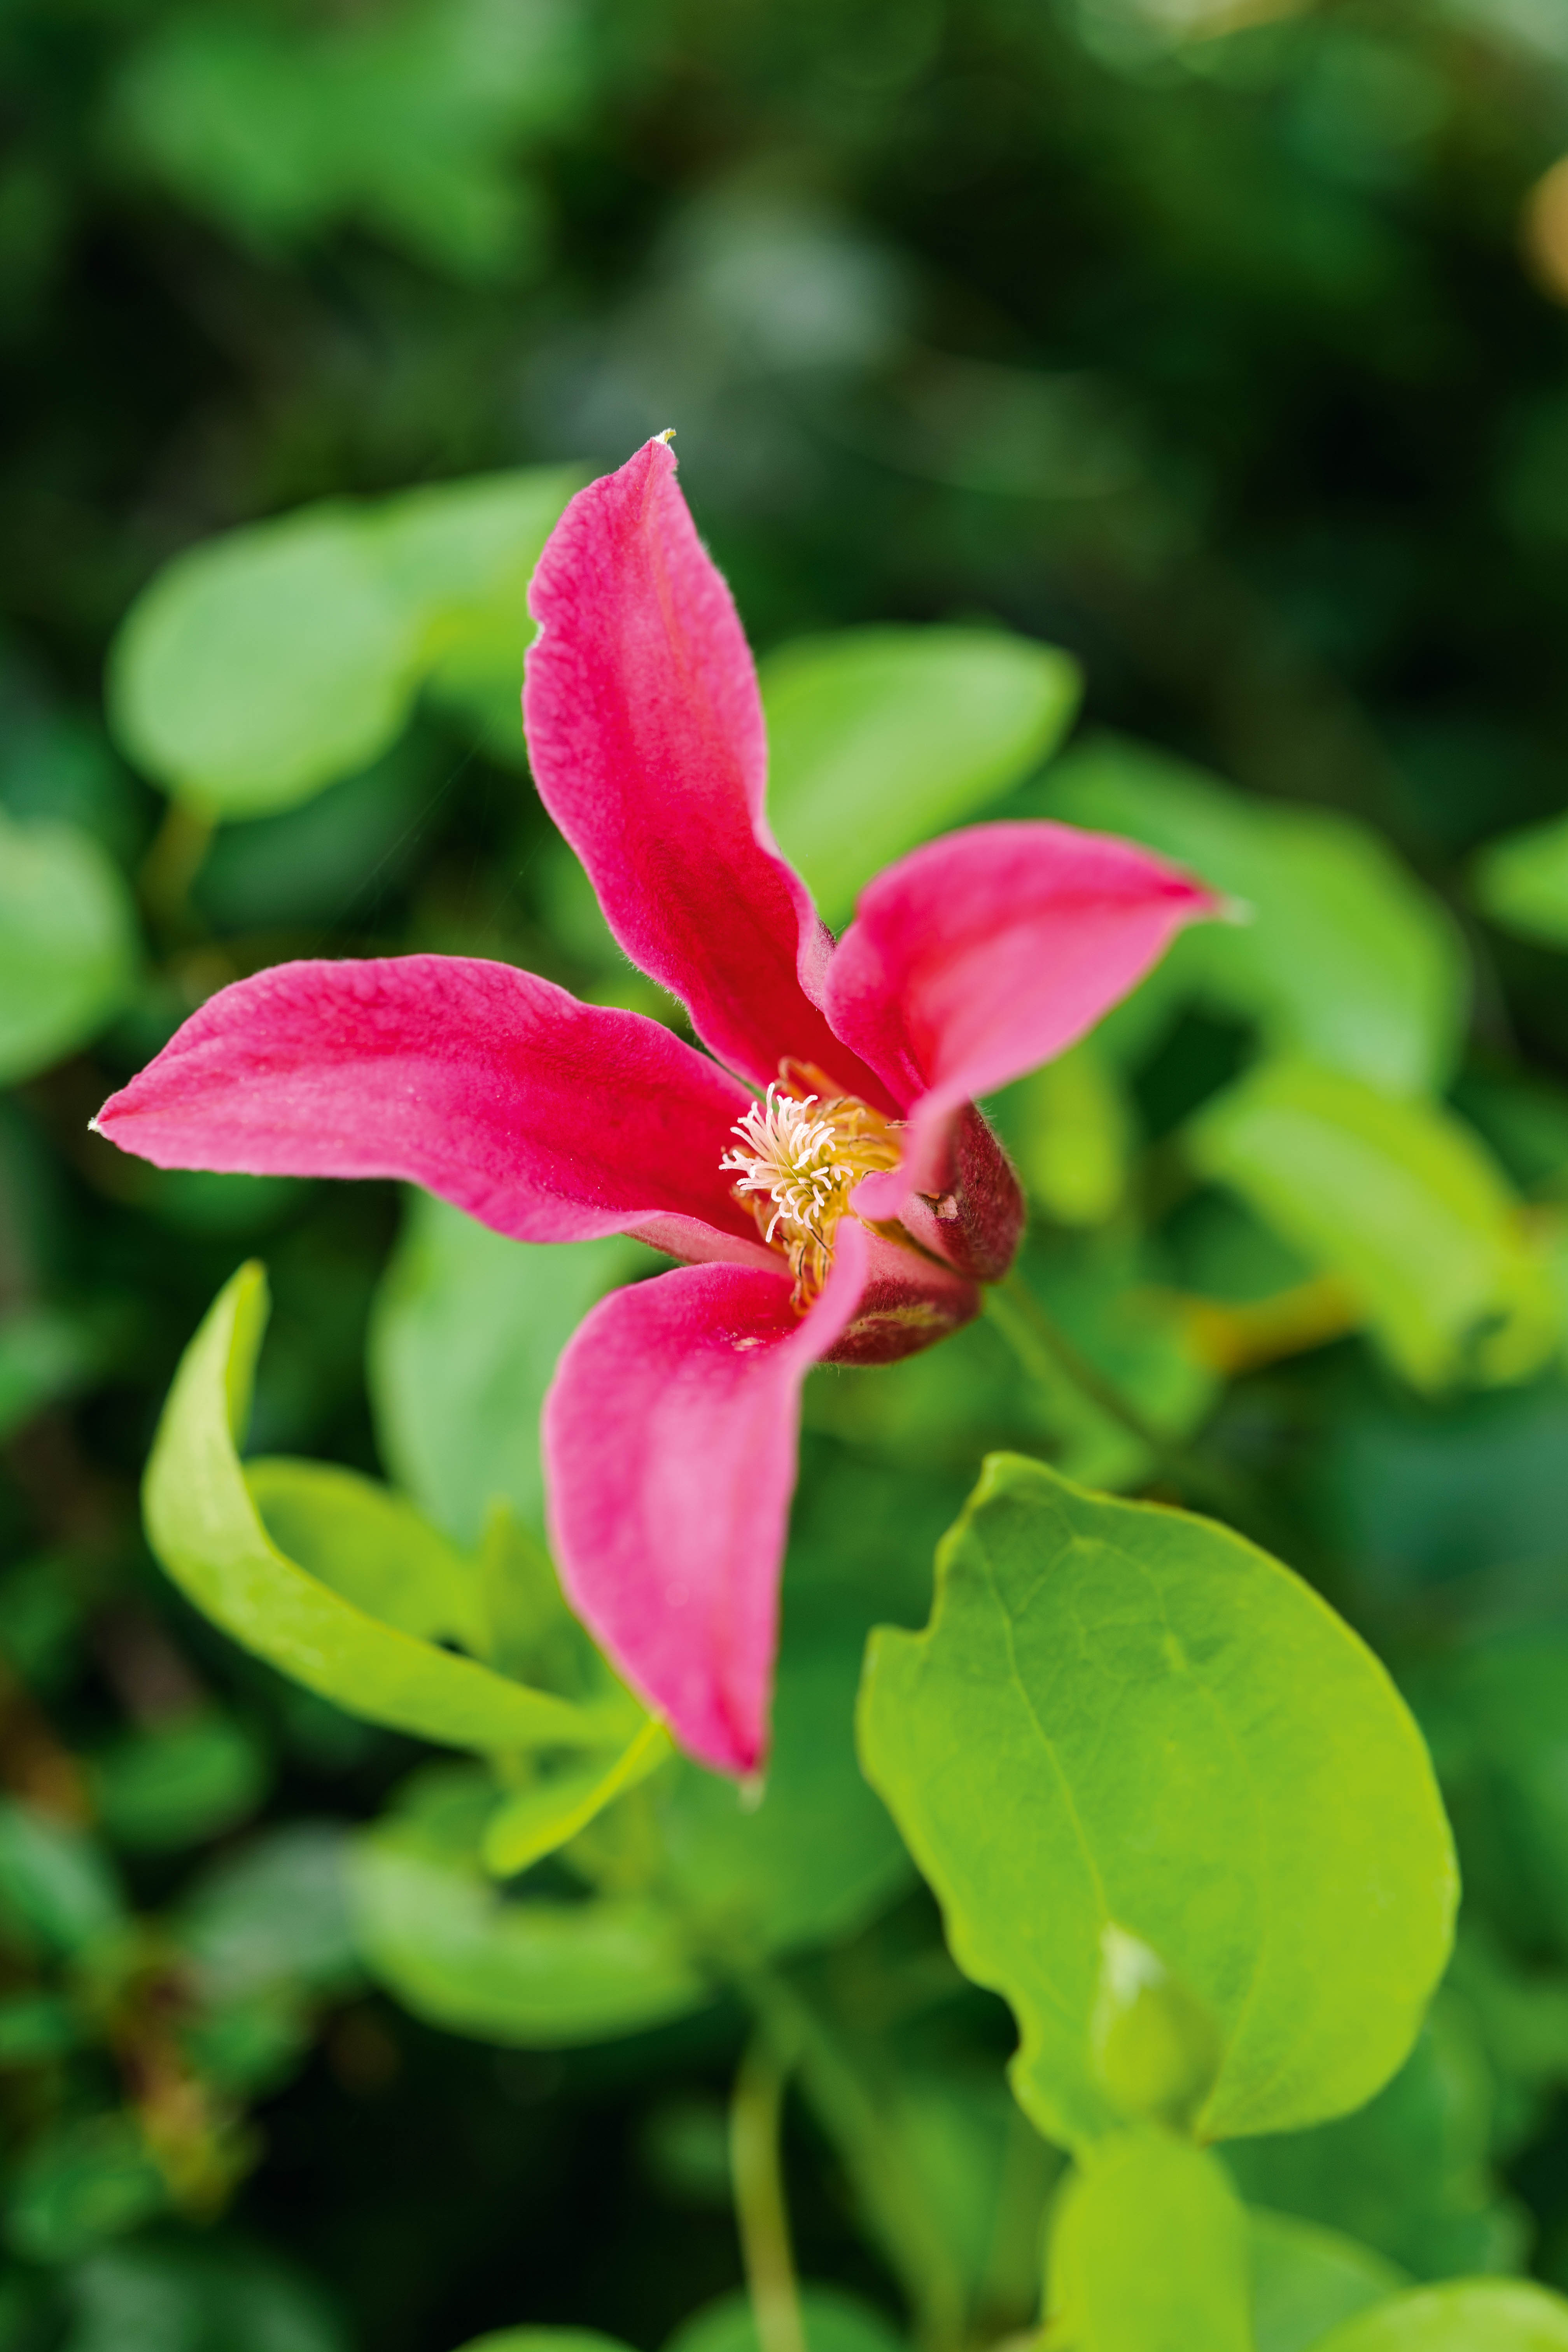 Pruning clematis: everything you need to know about how to prune clematis - Illustrated